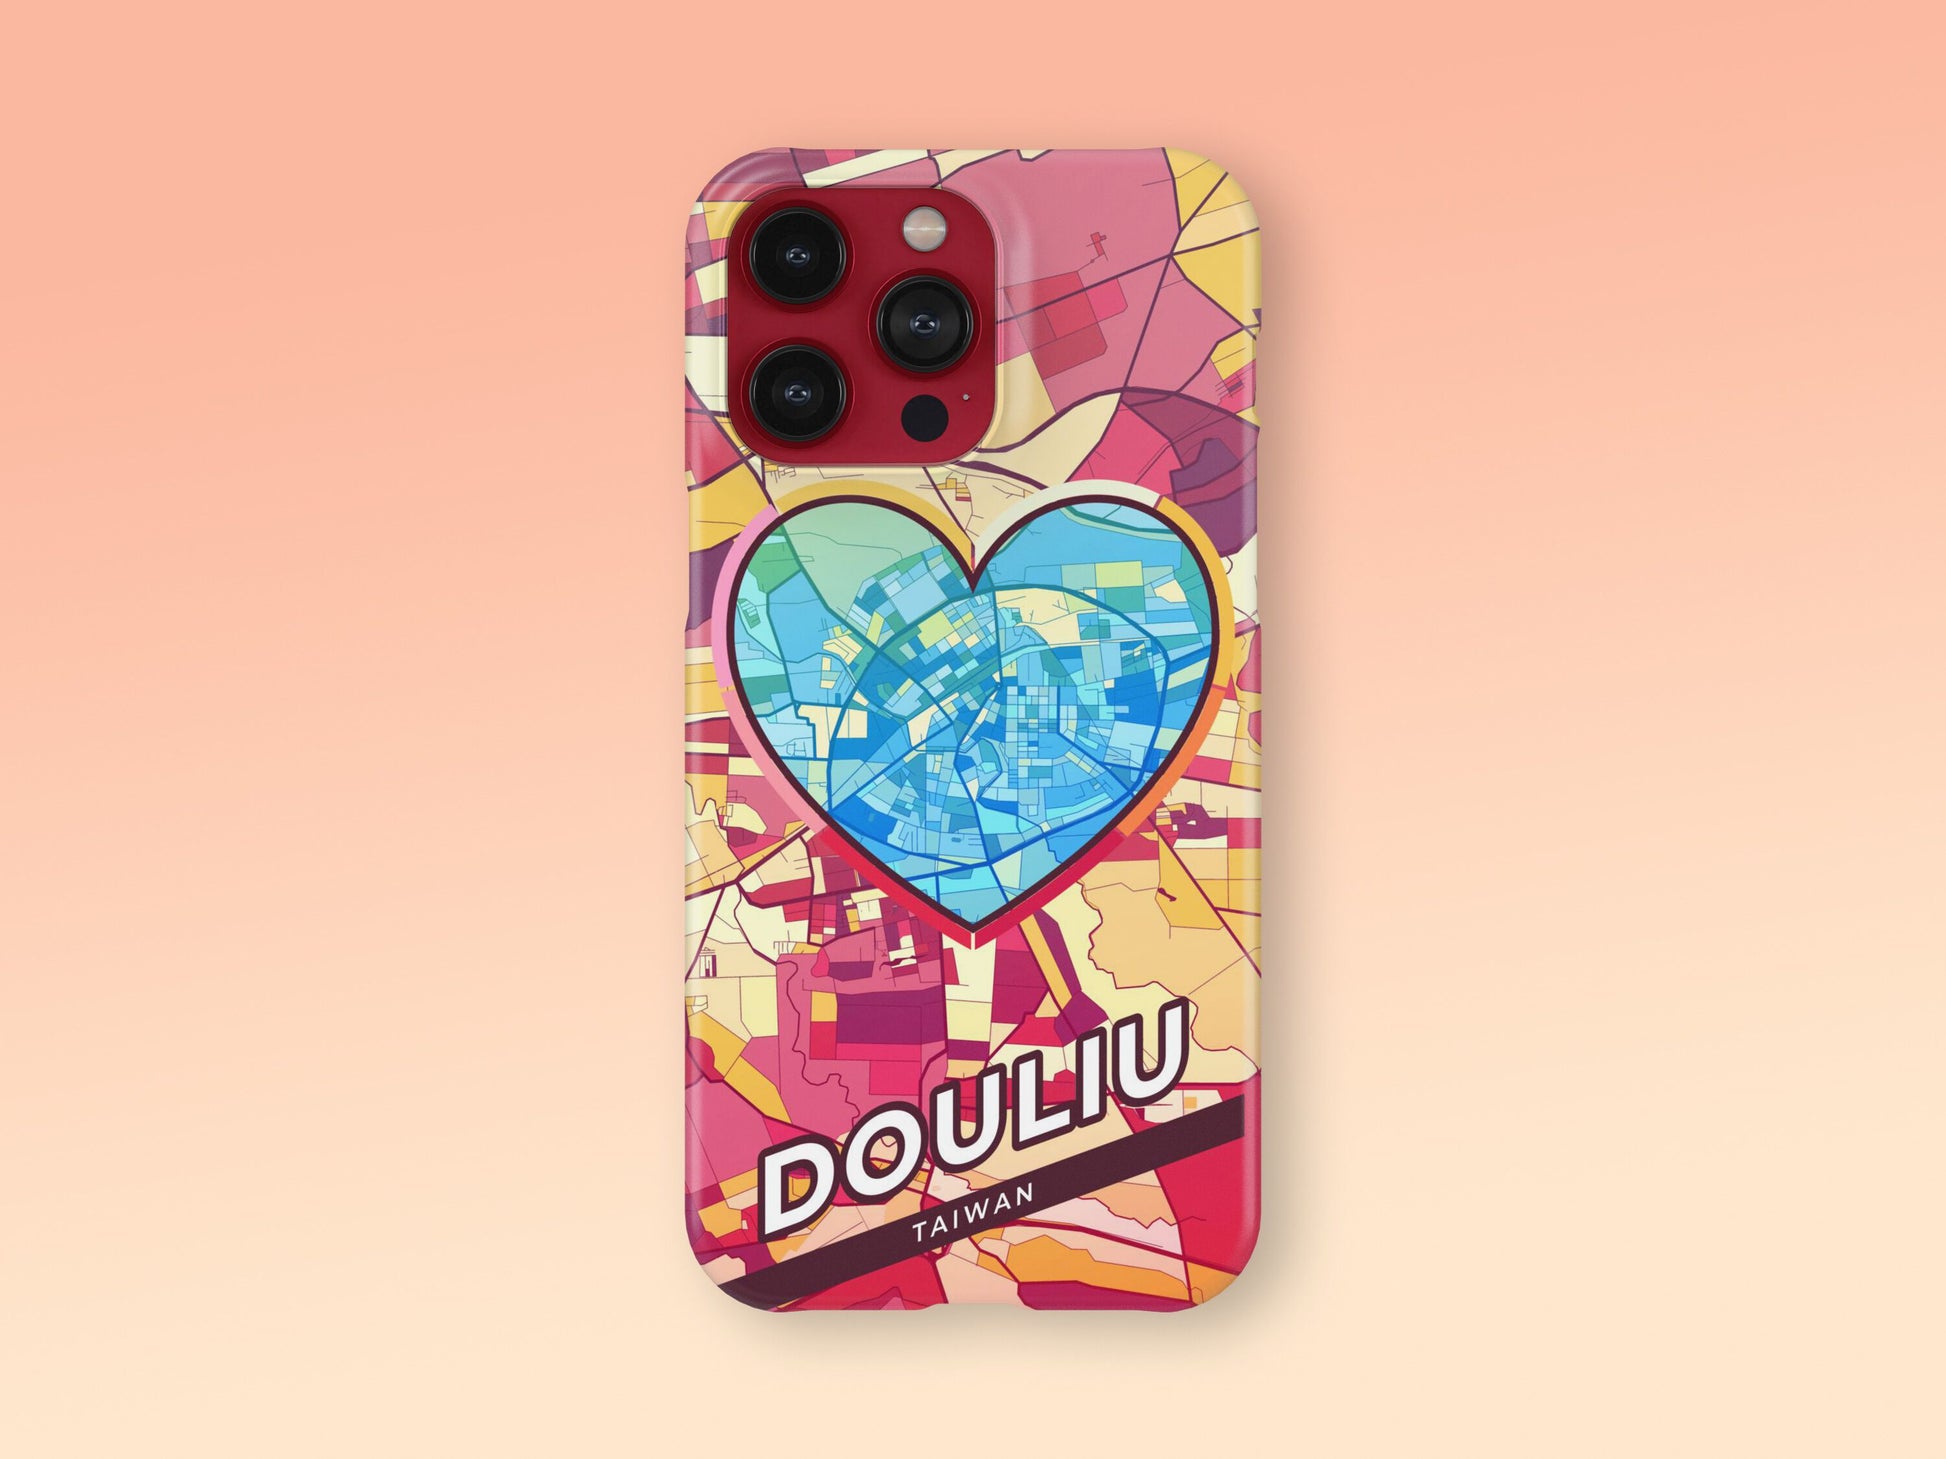 Douliu Taiwan slim phone case with colorful icon. Birthday, wedding or housewarming gift. Couple match cases. 2